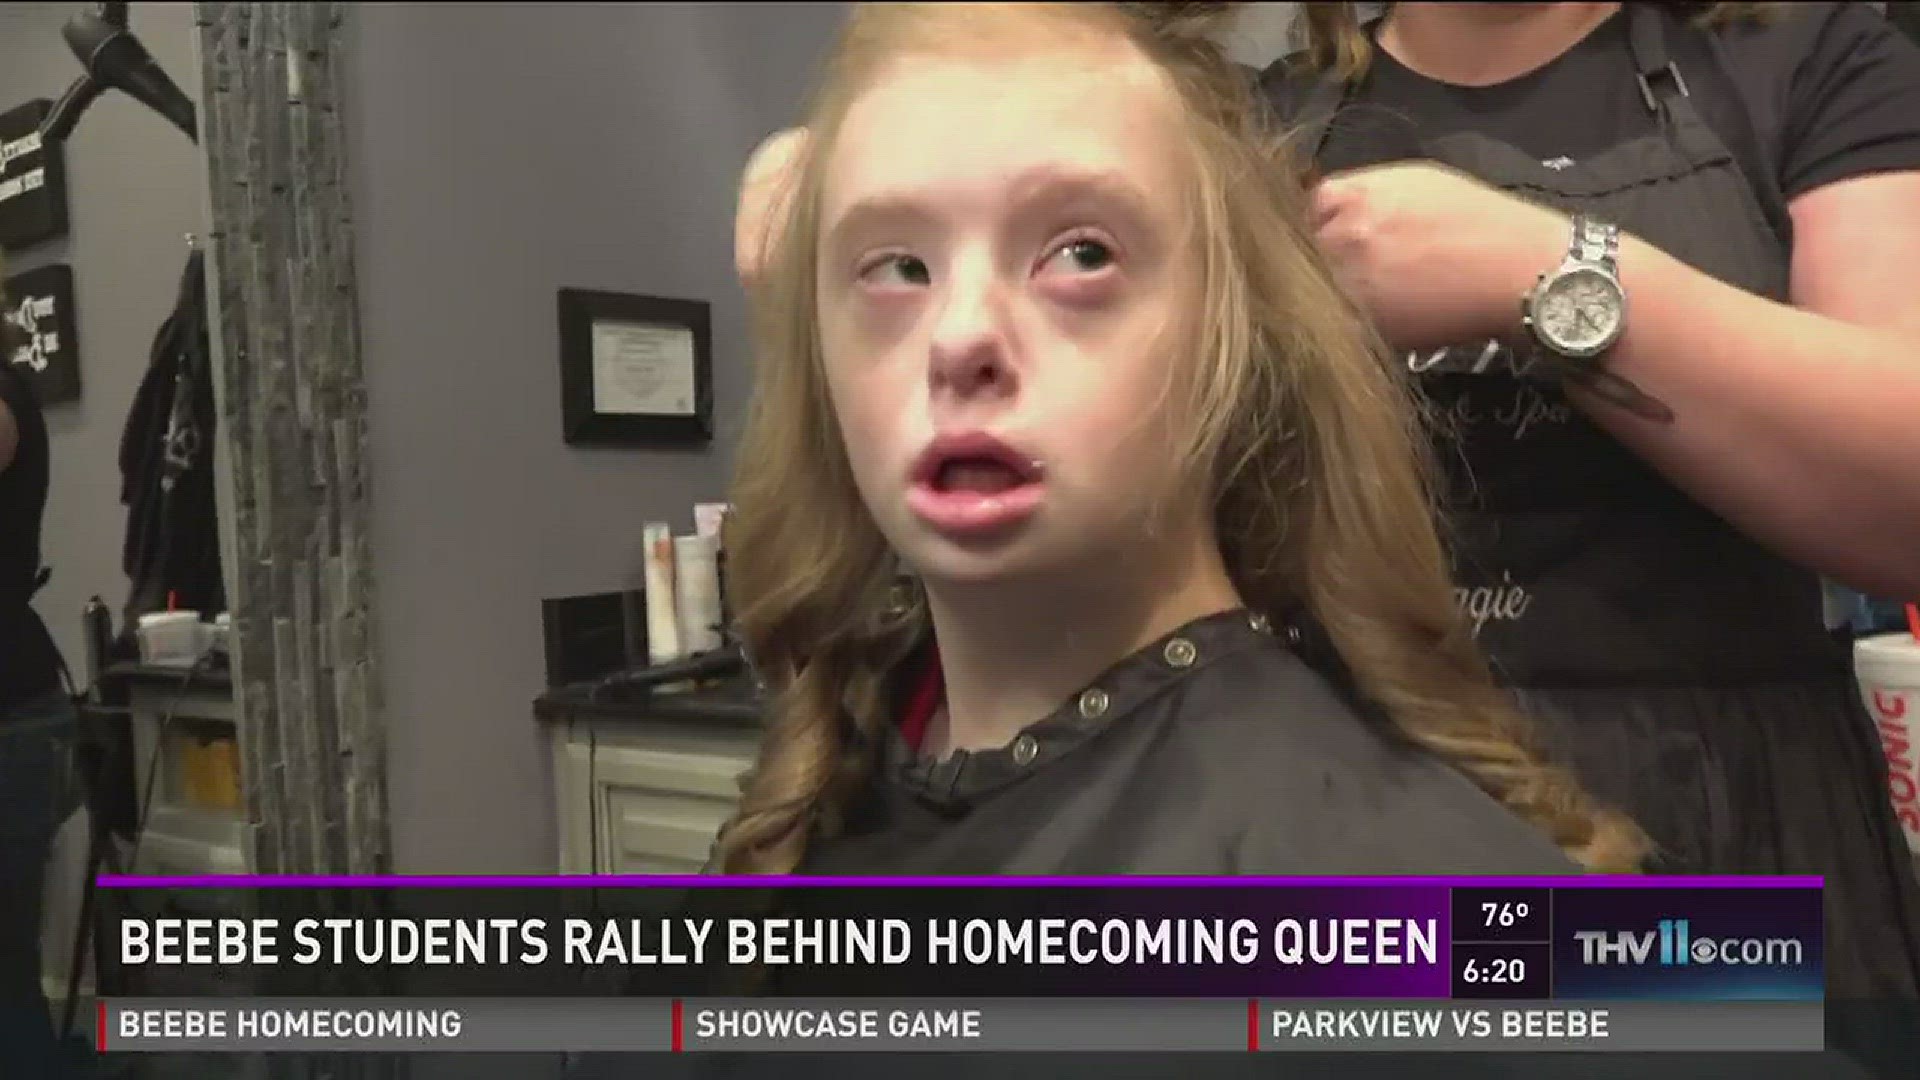 Beebe students rally behind homecoming queen